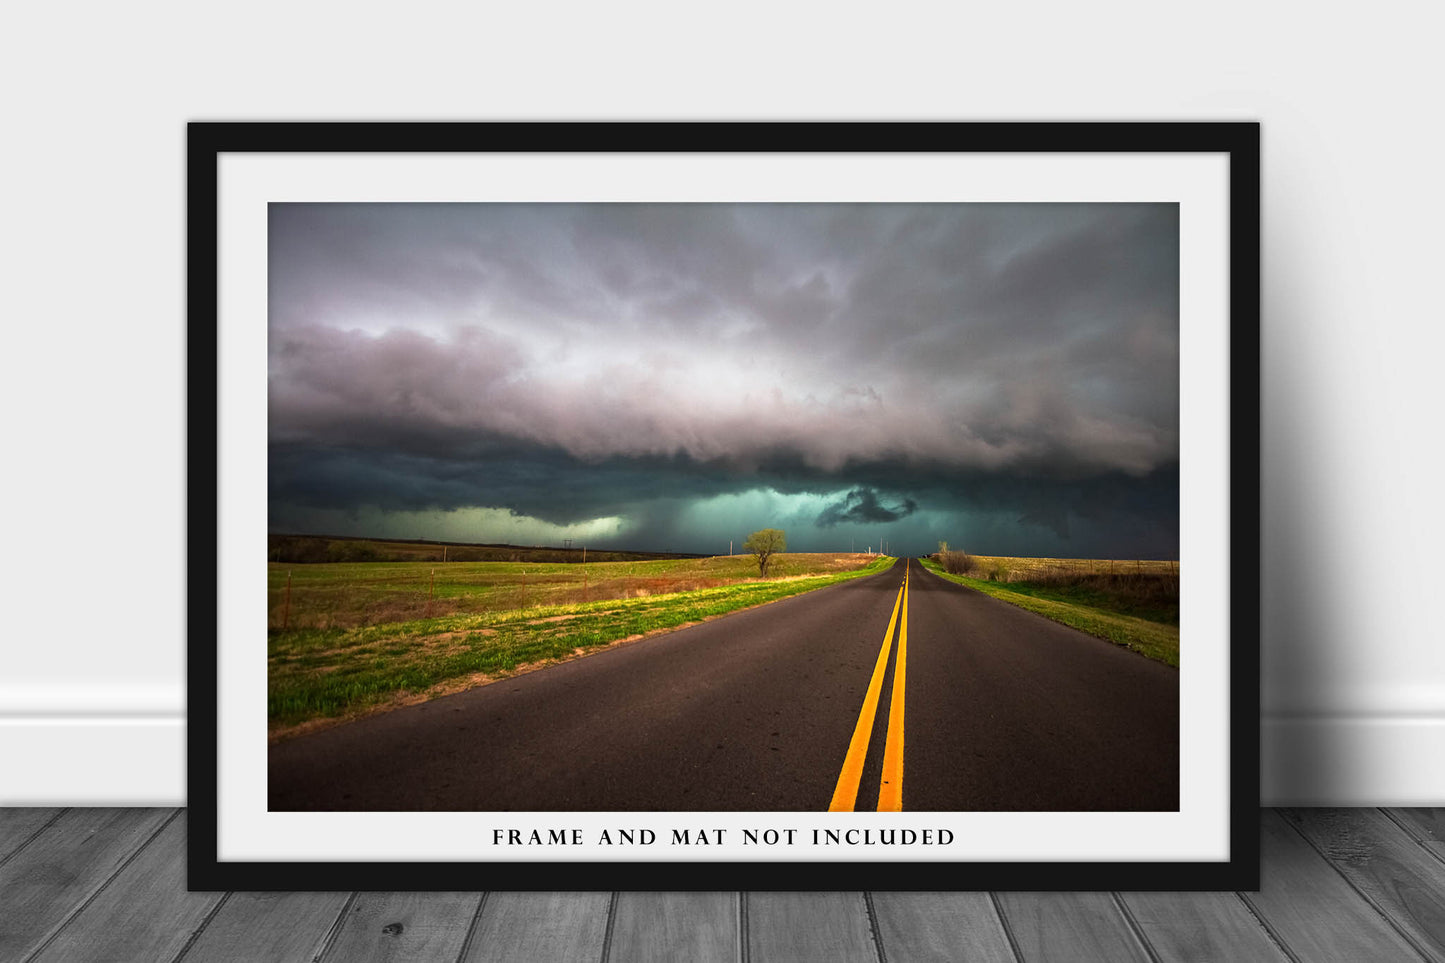 Storm Photography Print - Fine Art Highway Picture of Road and Thunderstorm in Oklahoma Weather Travel Adventure Wall Art Photo Decor